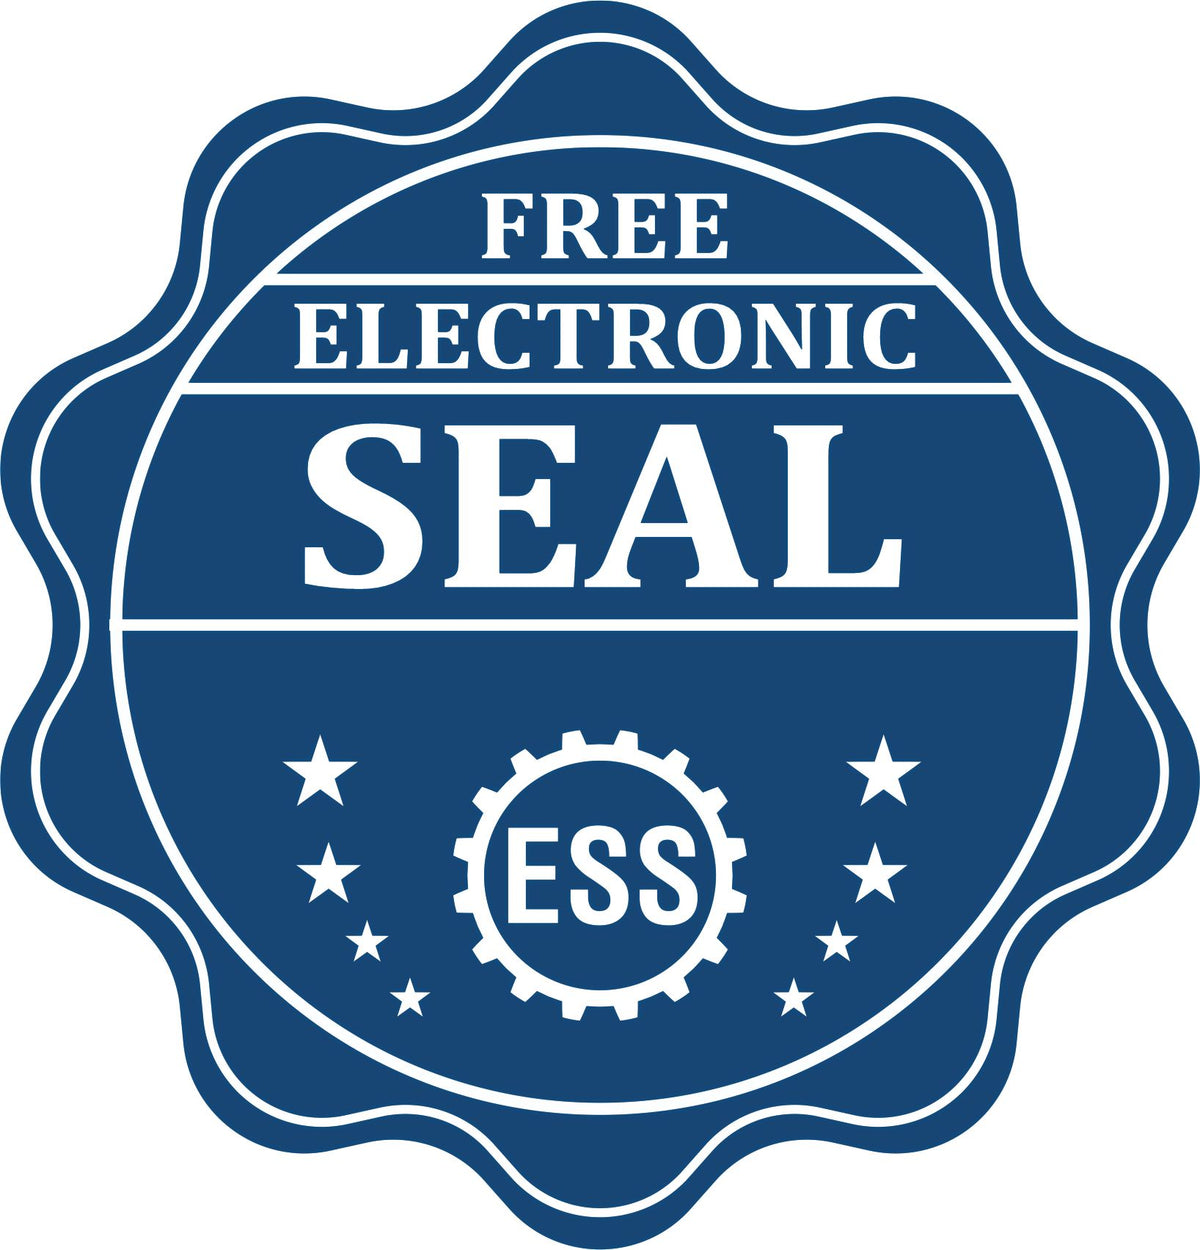 A badge showing a free electronic seal for the Handheld Georgia Professional Engineer Embosser with stars and the ESS gear on the emblem.